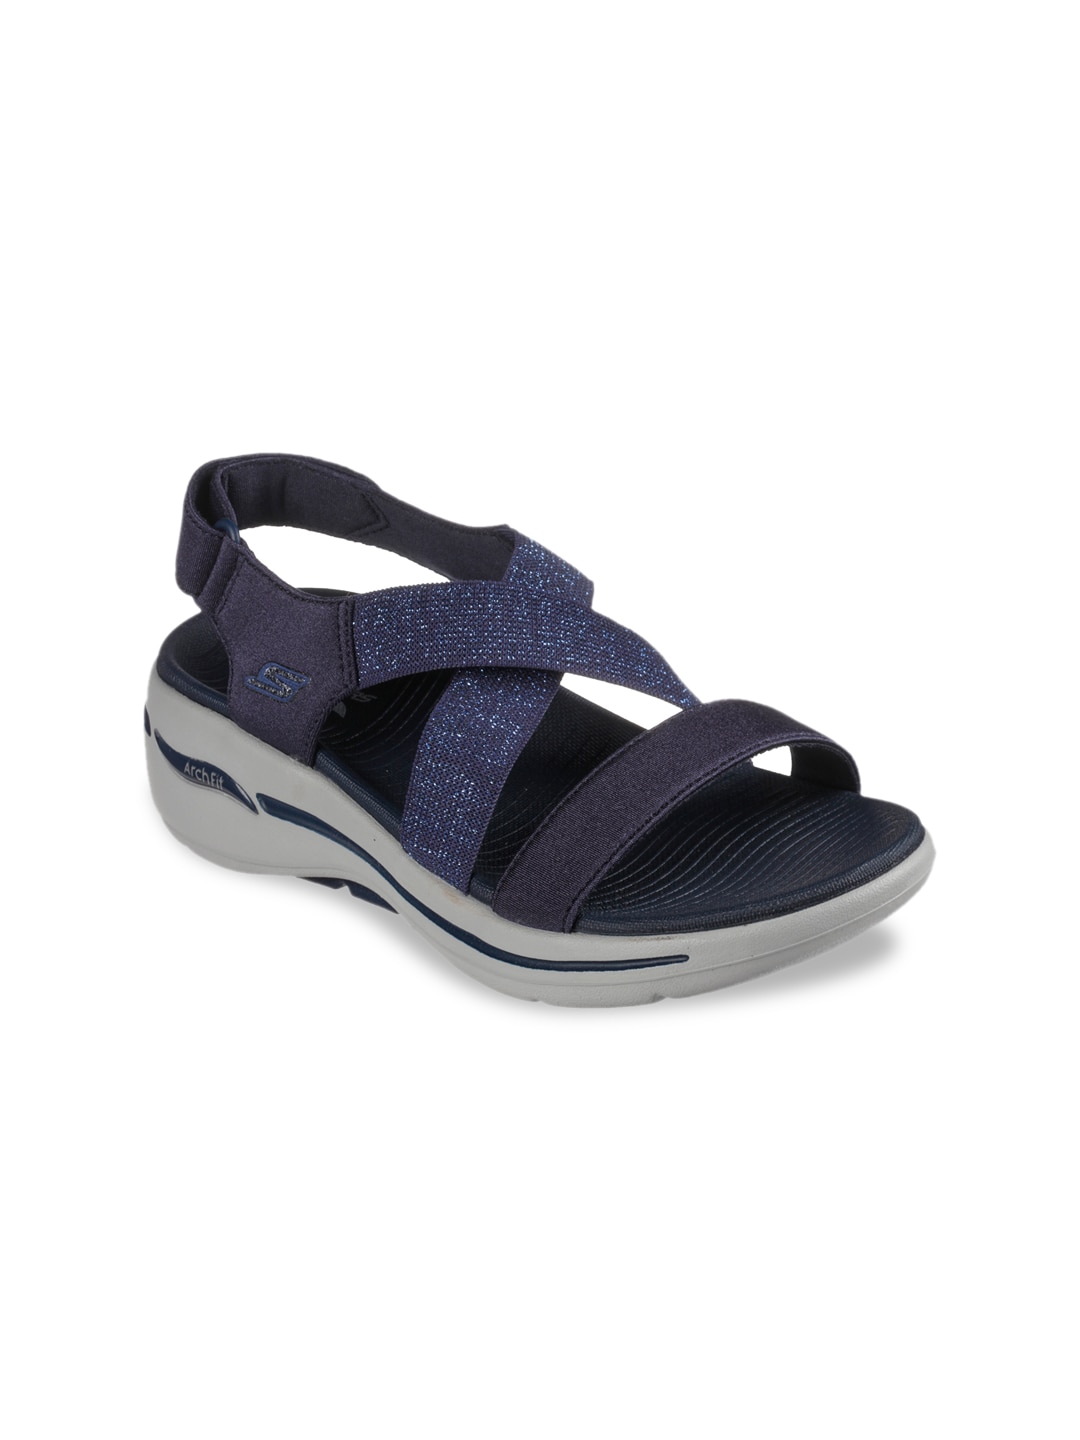 Skechers Women Navy Blue  Solid Sports Sandal Price in India